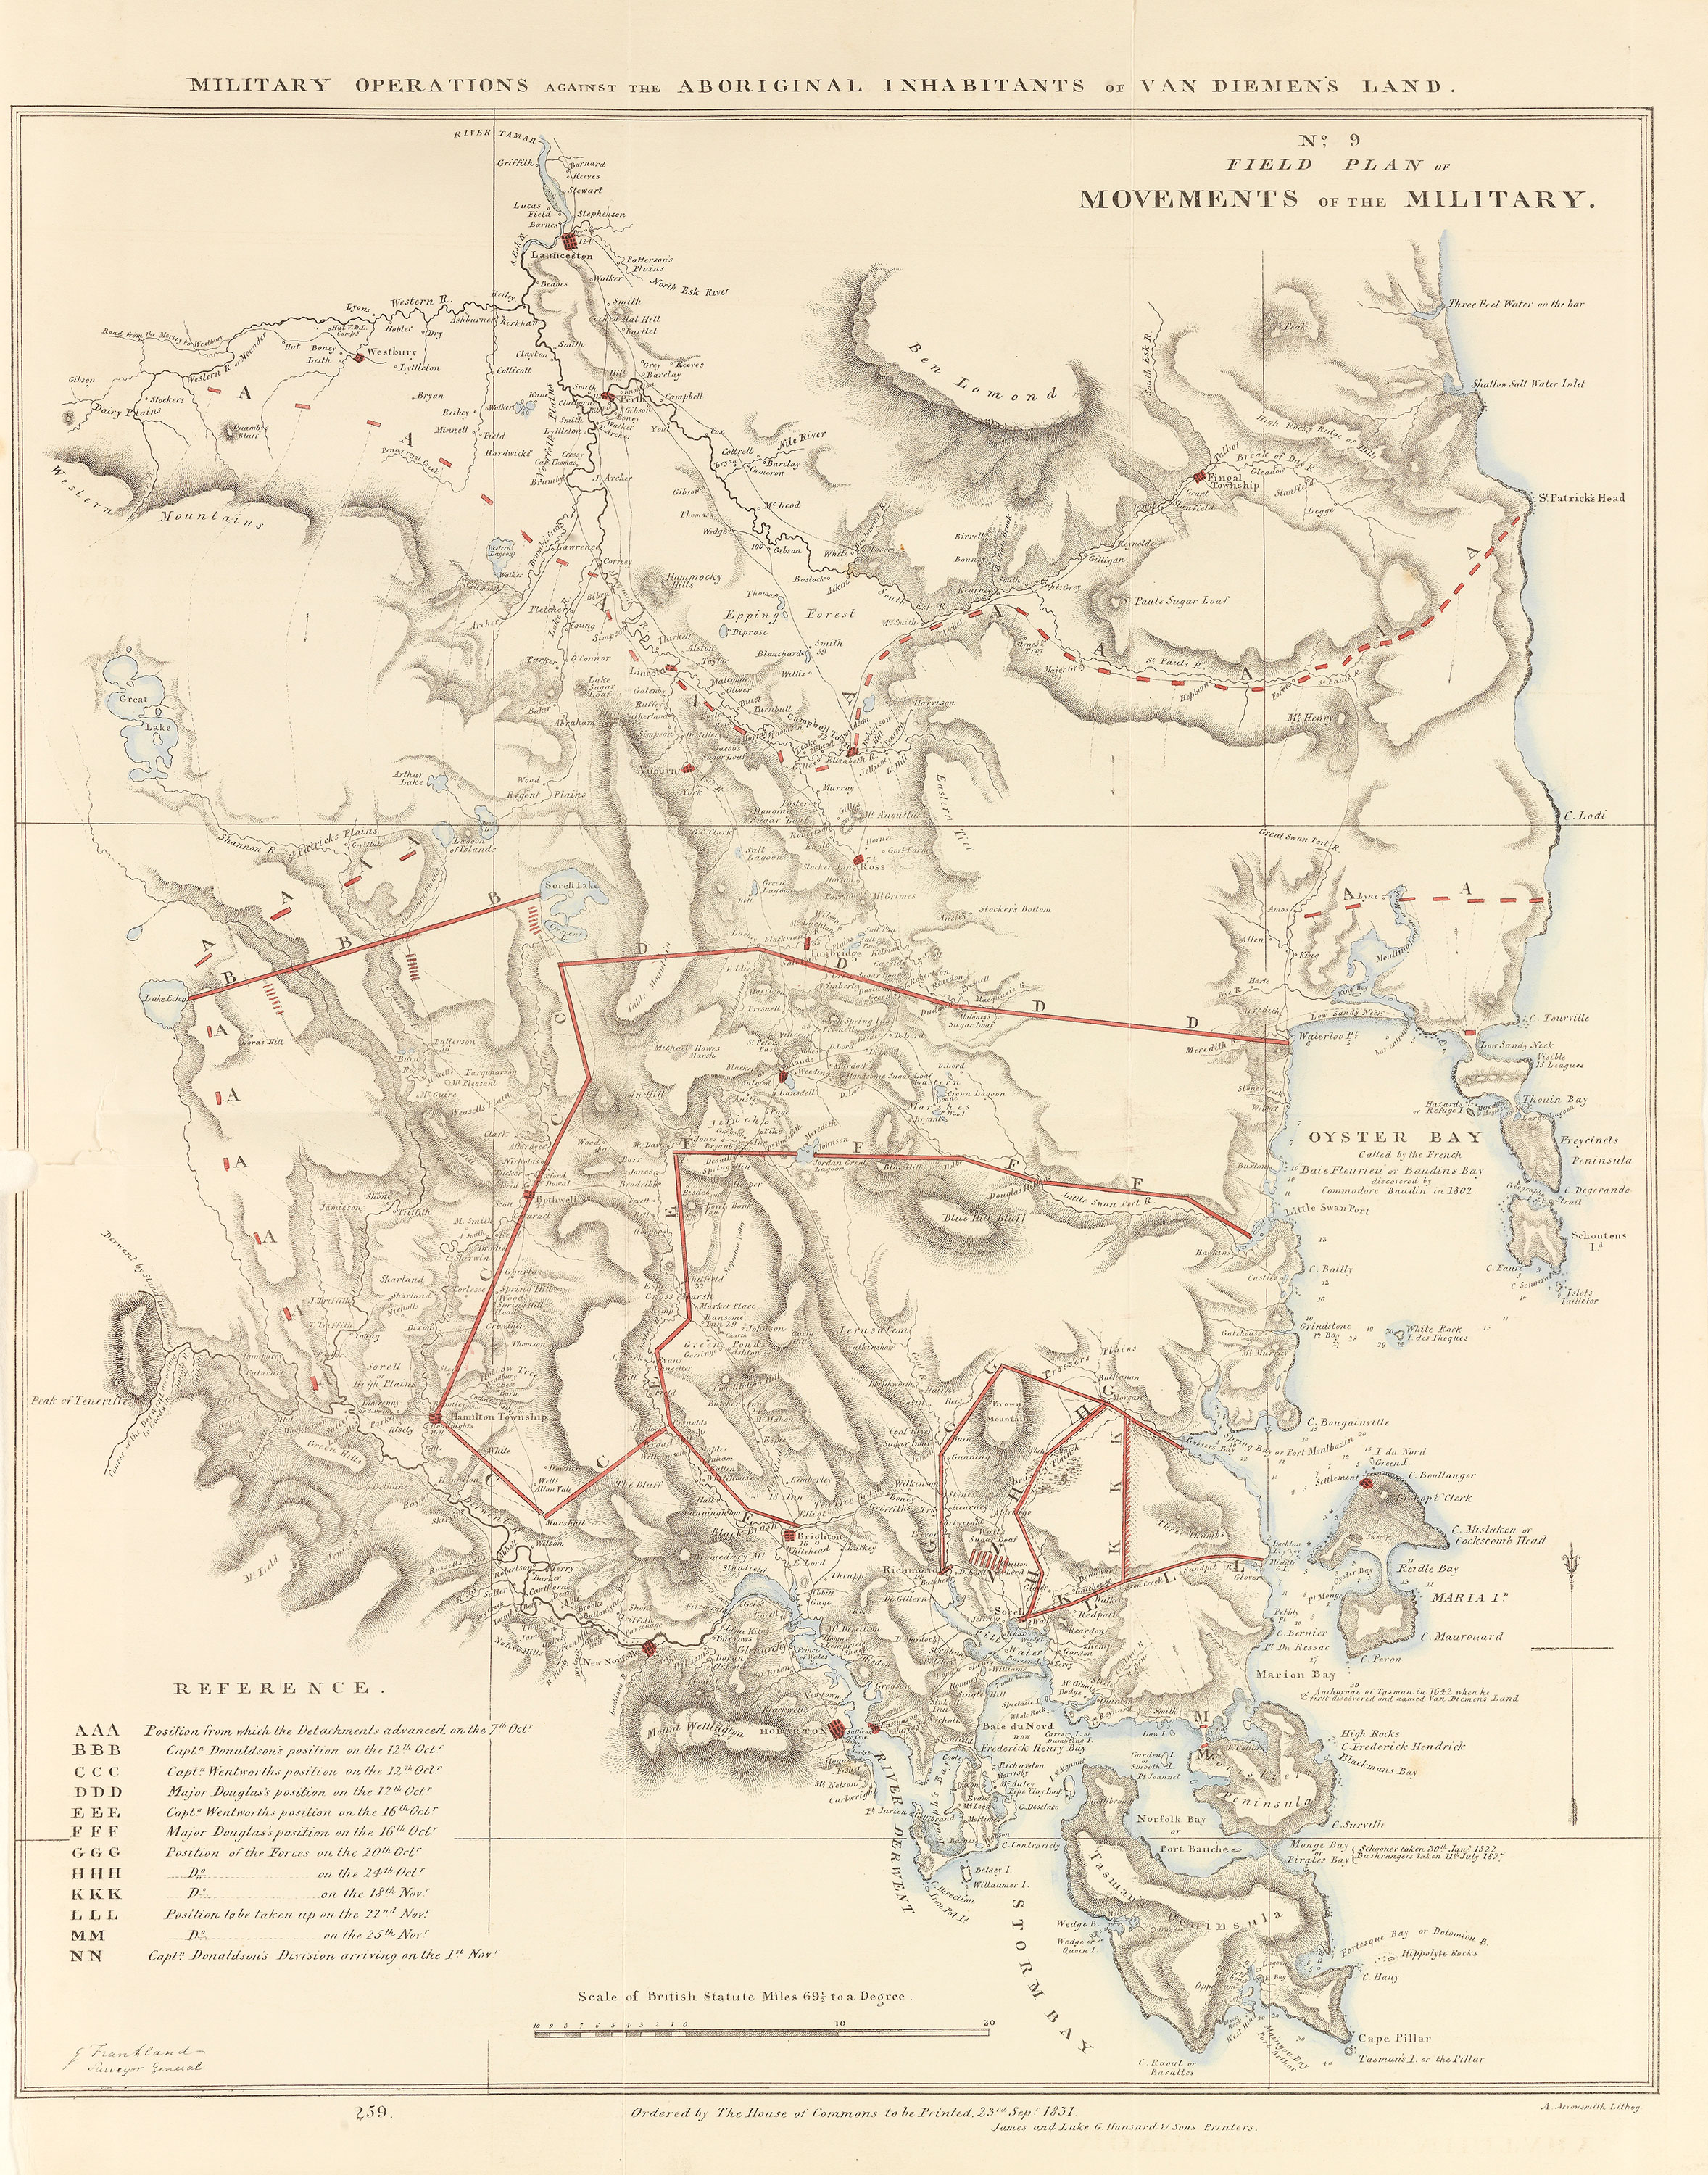 <p>Map showing movements of the Black Line, 1831</p>

<p>&nbsp;</p>
